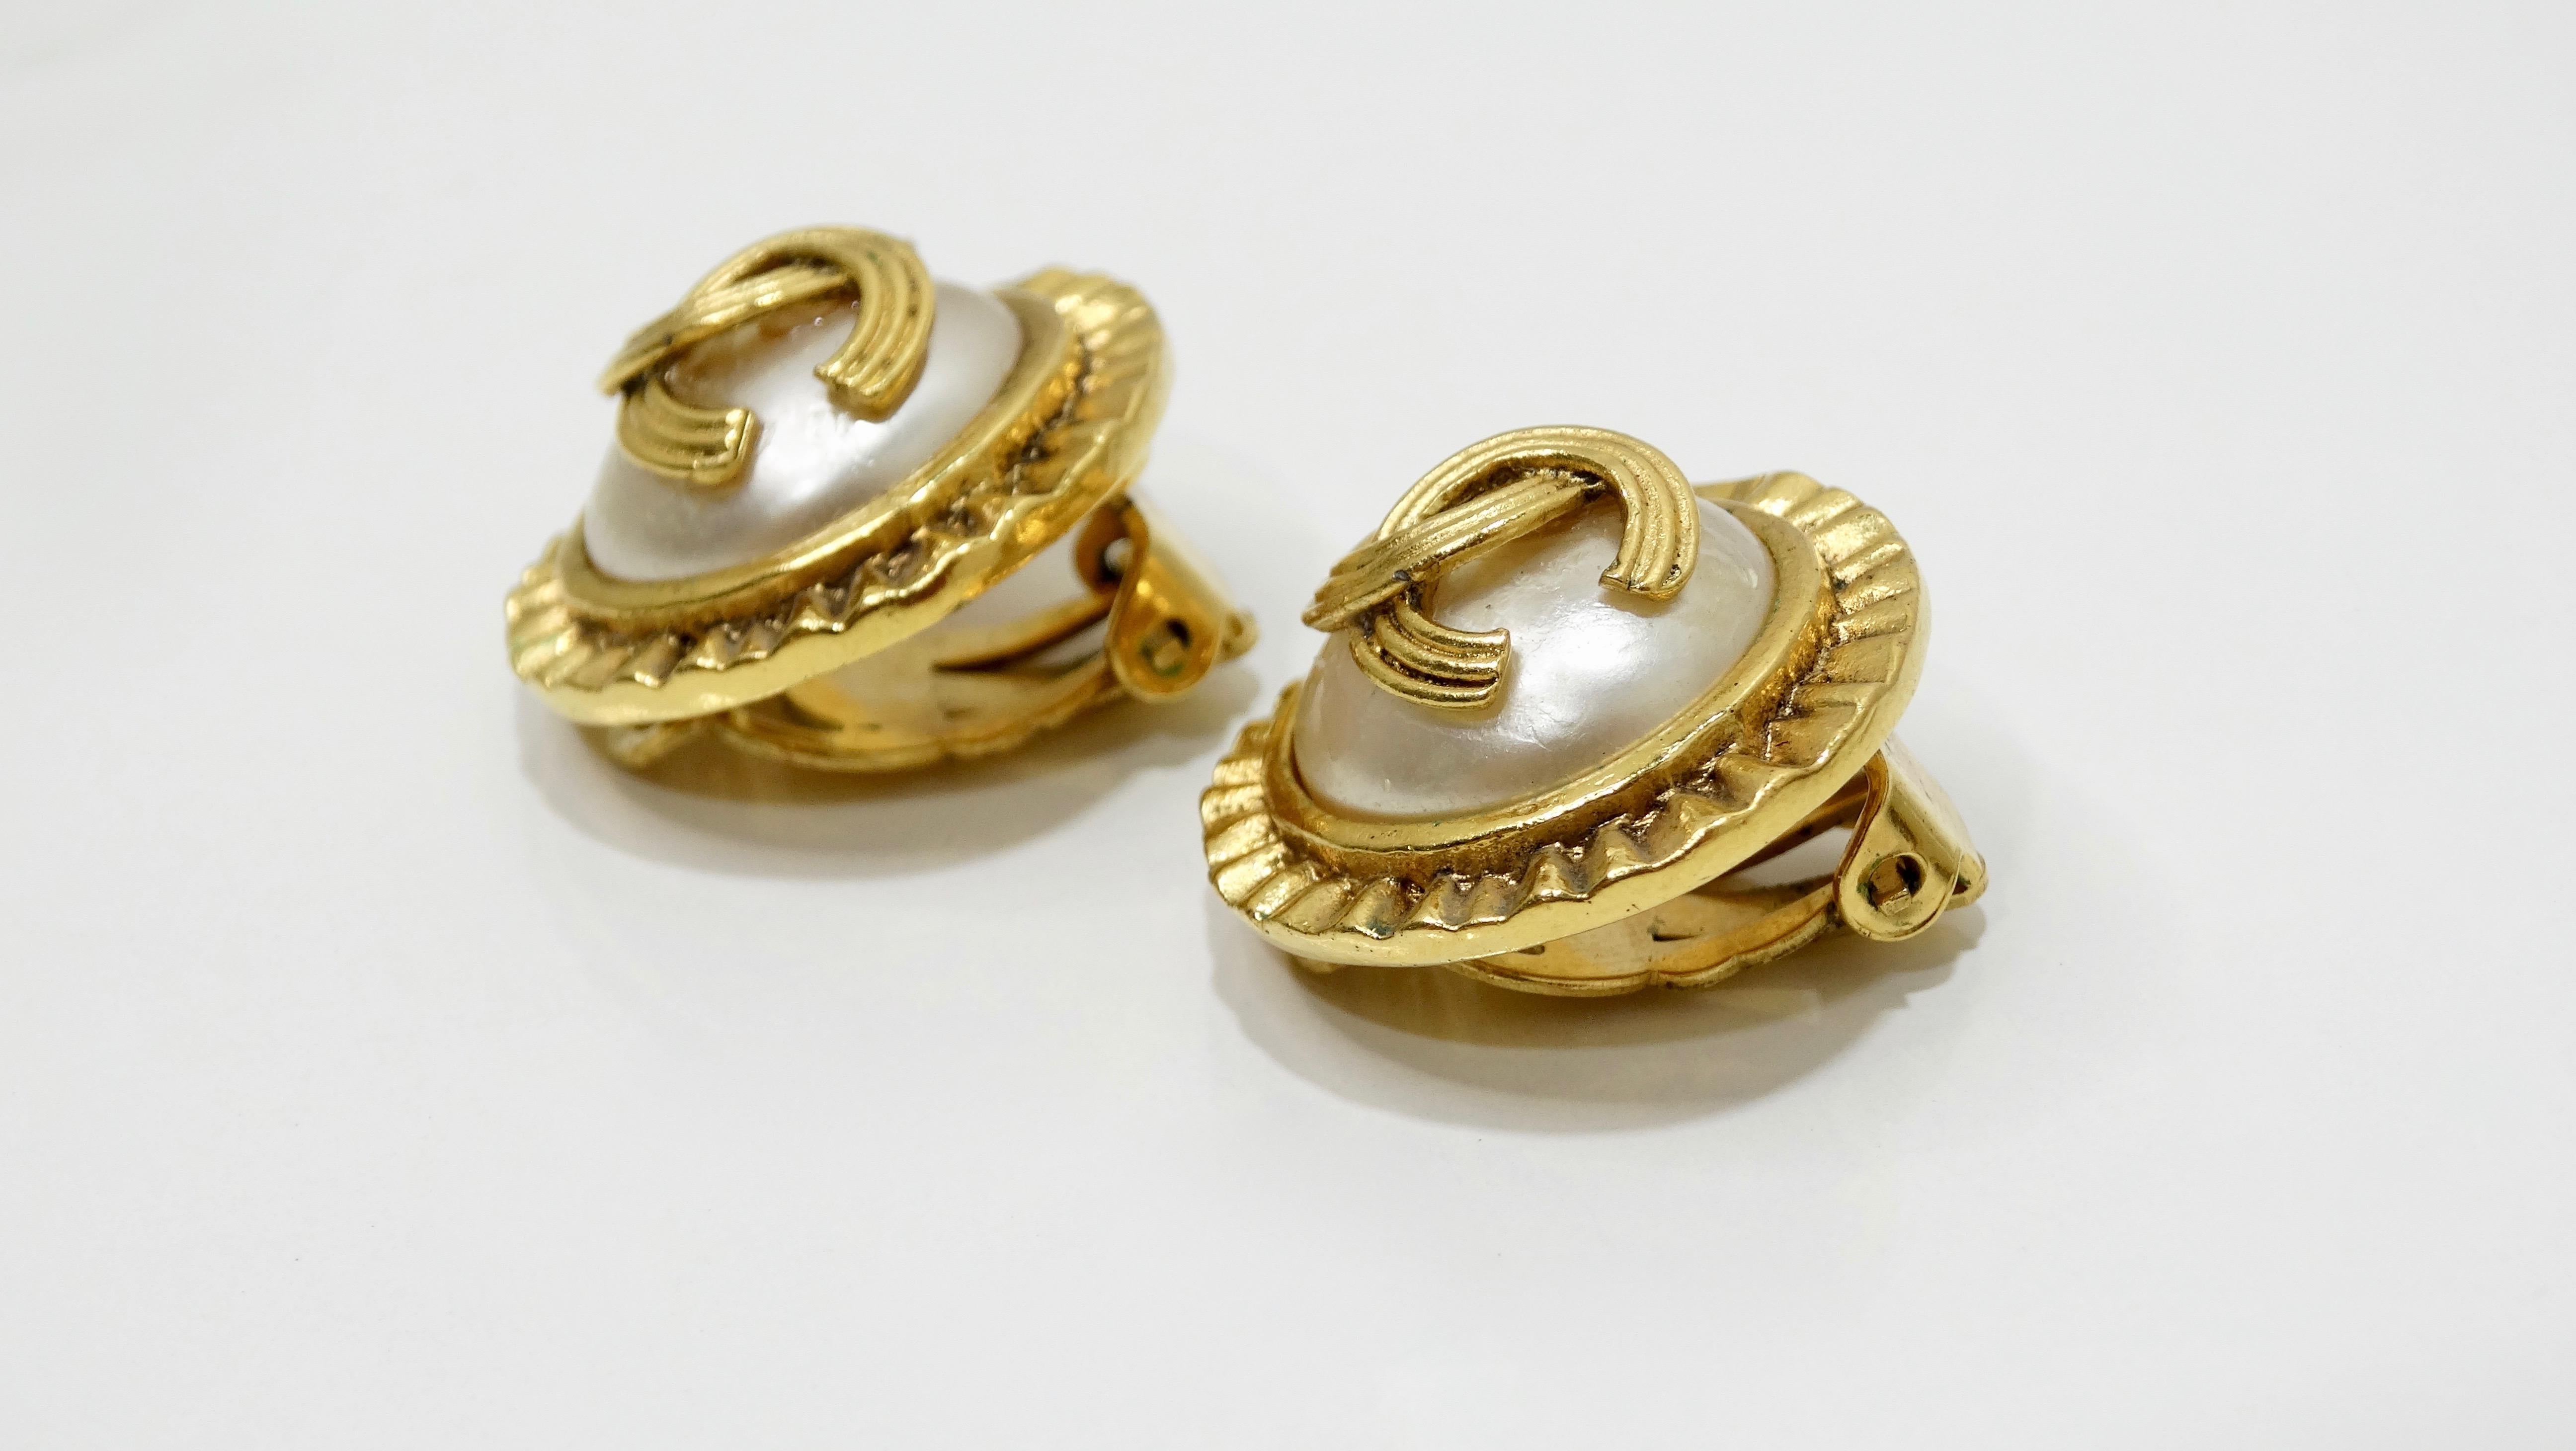 For every Chanel lover! Circa 1994 from Chanel's Autumn collection, these earrings feature a textured metal trim, an overall gold plated finish, a faux pearl center with the iconic CC on top and clip-on closures. Whether you're going out for the day